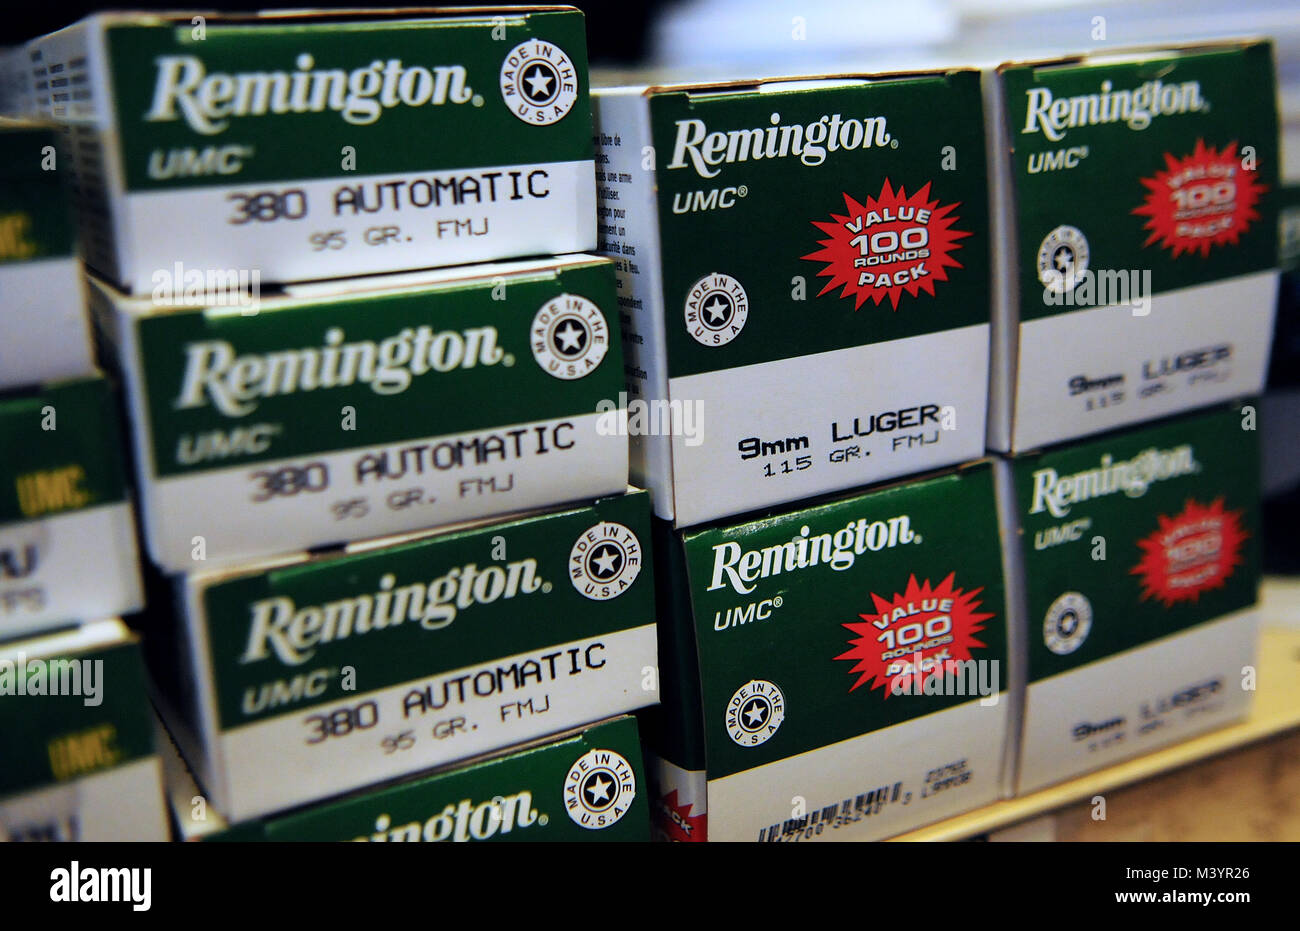 Orlando, Florida, United States . February 13, 2018 Remington ammunition is seen at the Bass Pro Shops sporting goods store on February 13, 2018 in Orlando, Florida, the day after Remington Outdoor Company, the 202 year-old gunmaker, announced plans to file for Chapter 11 bankruptcy protection. The gun industry has suffered from slumping sales since the election of President Donald Trump, as fears of more stringent gun control laws were calmed. (Paul Hennessy/Alamy) Stock Photo